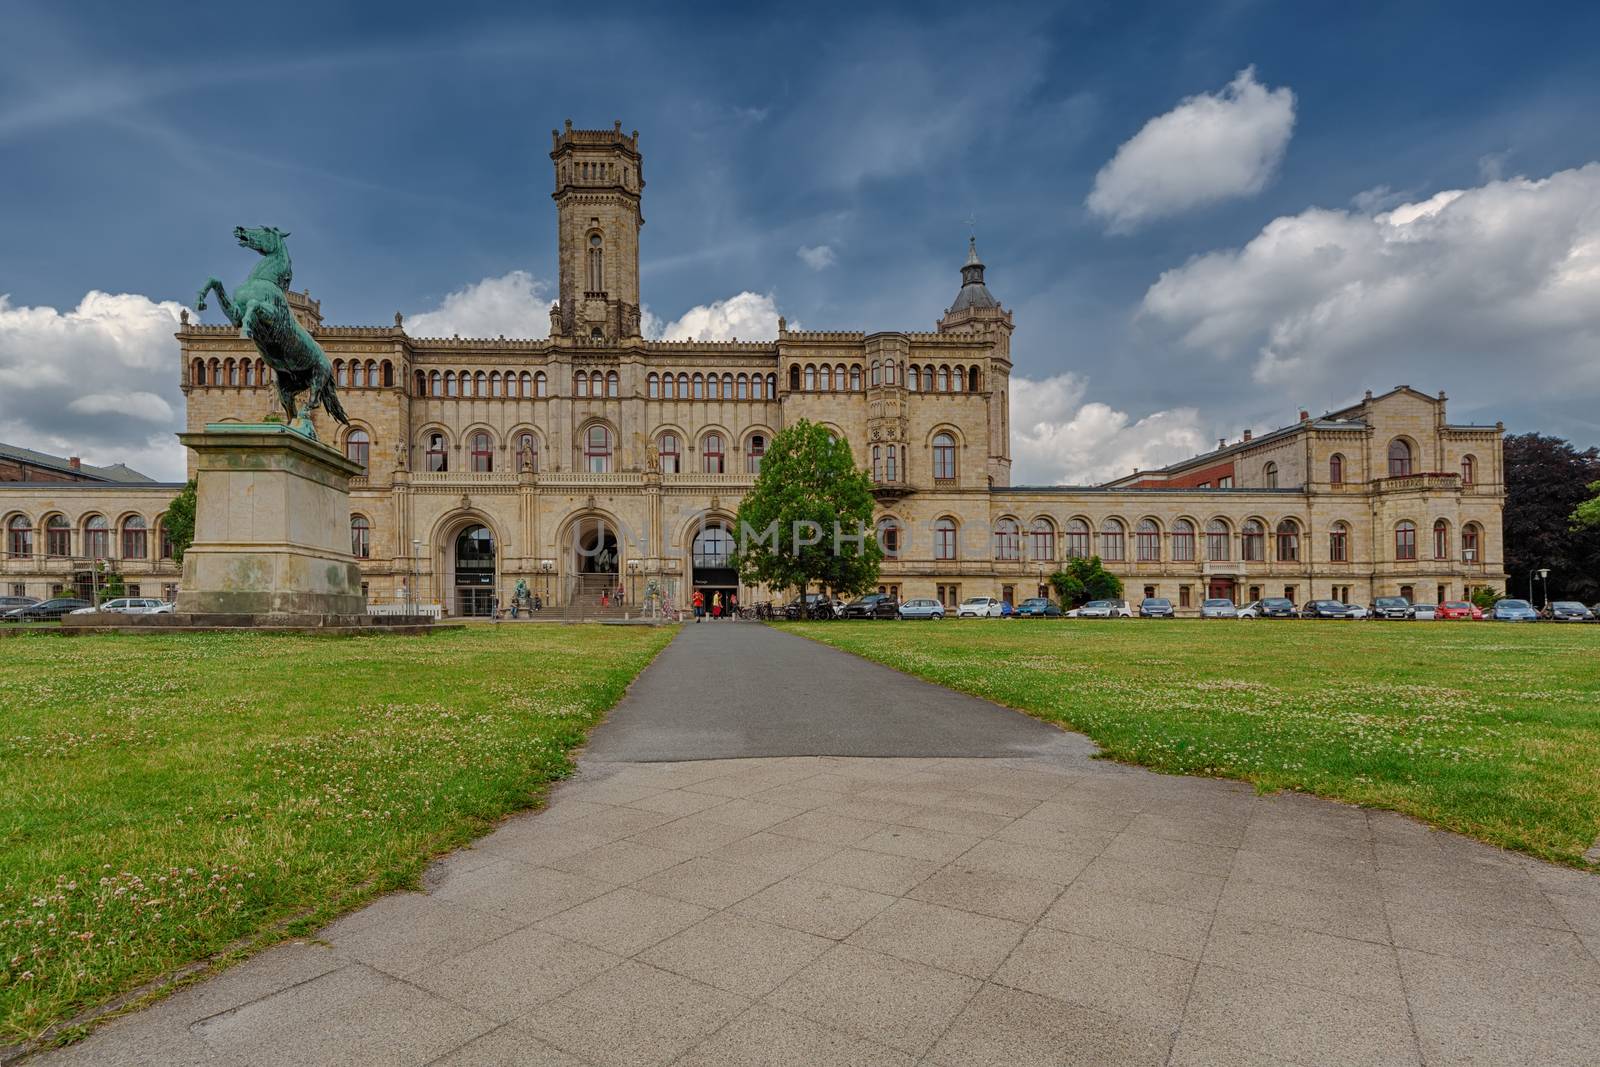 The University of Hannover, officially the Gottfried Wilhelm Leibniz University Hannover, short Leibniz University Hannover, is a public university located in Hannover, Germany.